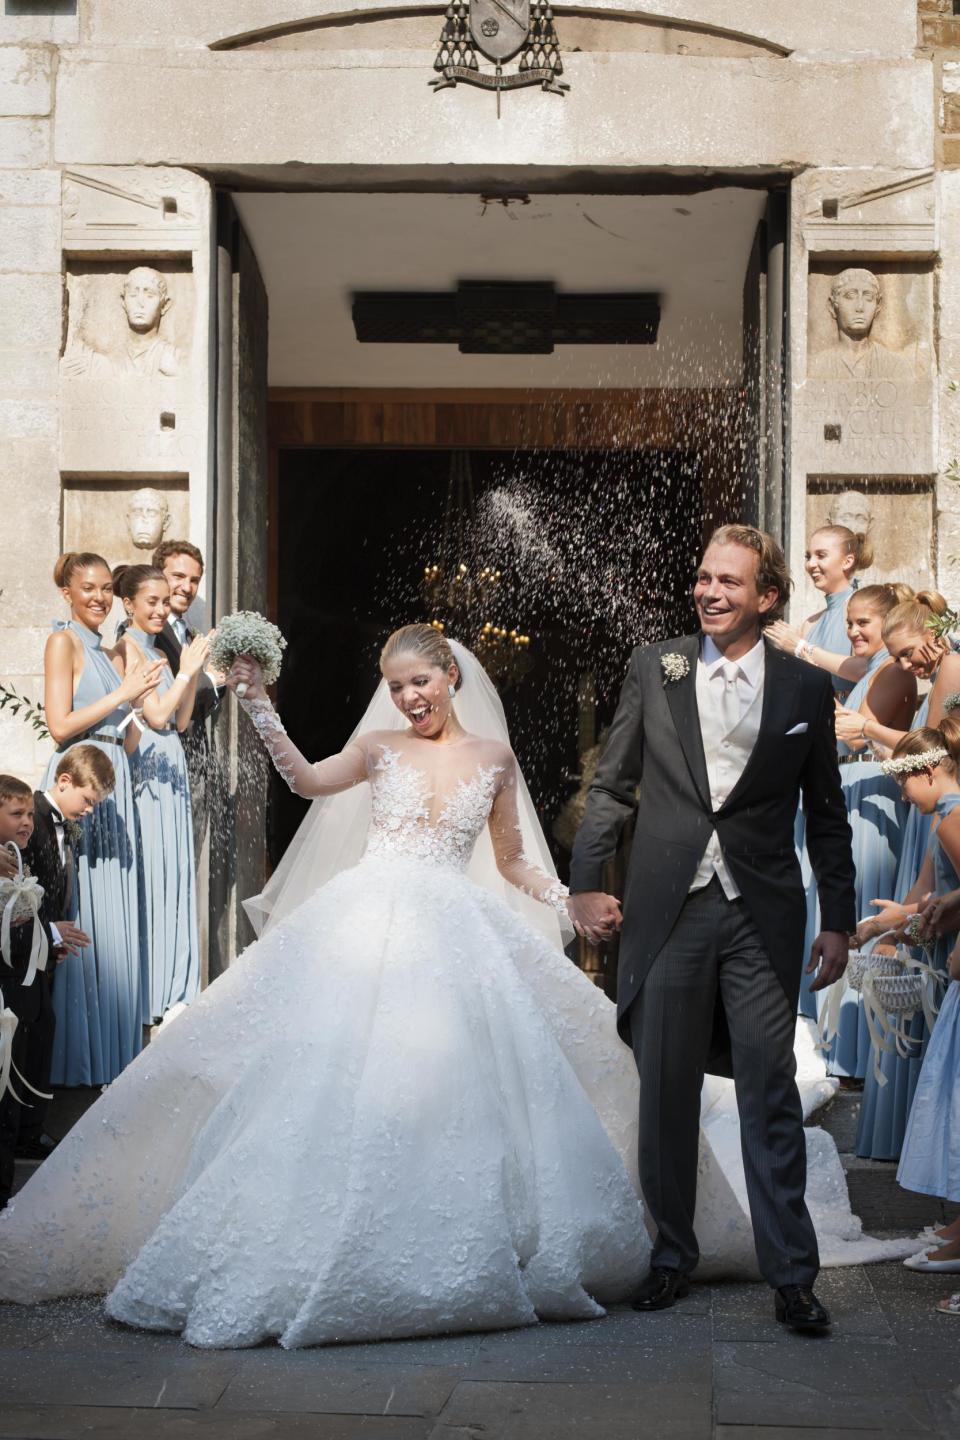 Victoria Swarovski and Werner Muerz exit the church after their wedding. (Chris Singer/Getty Images)